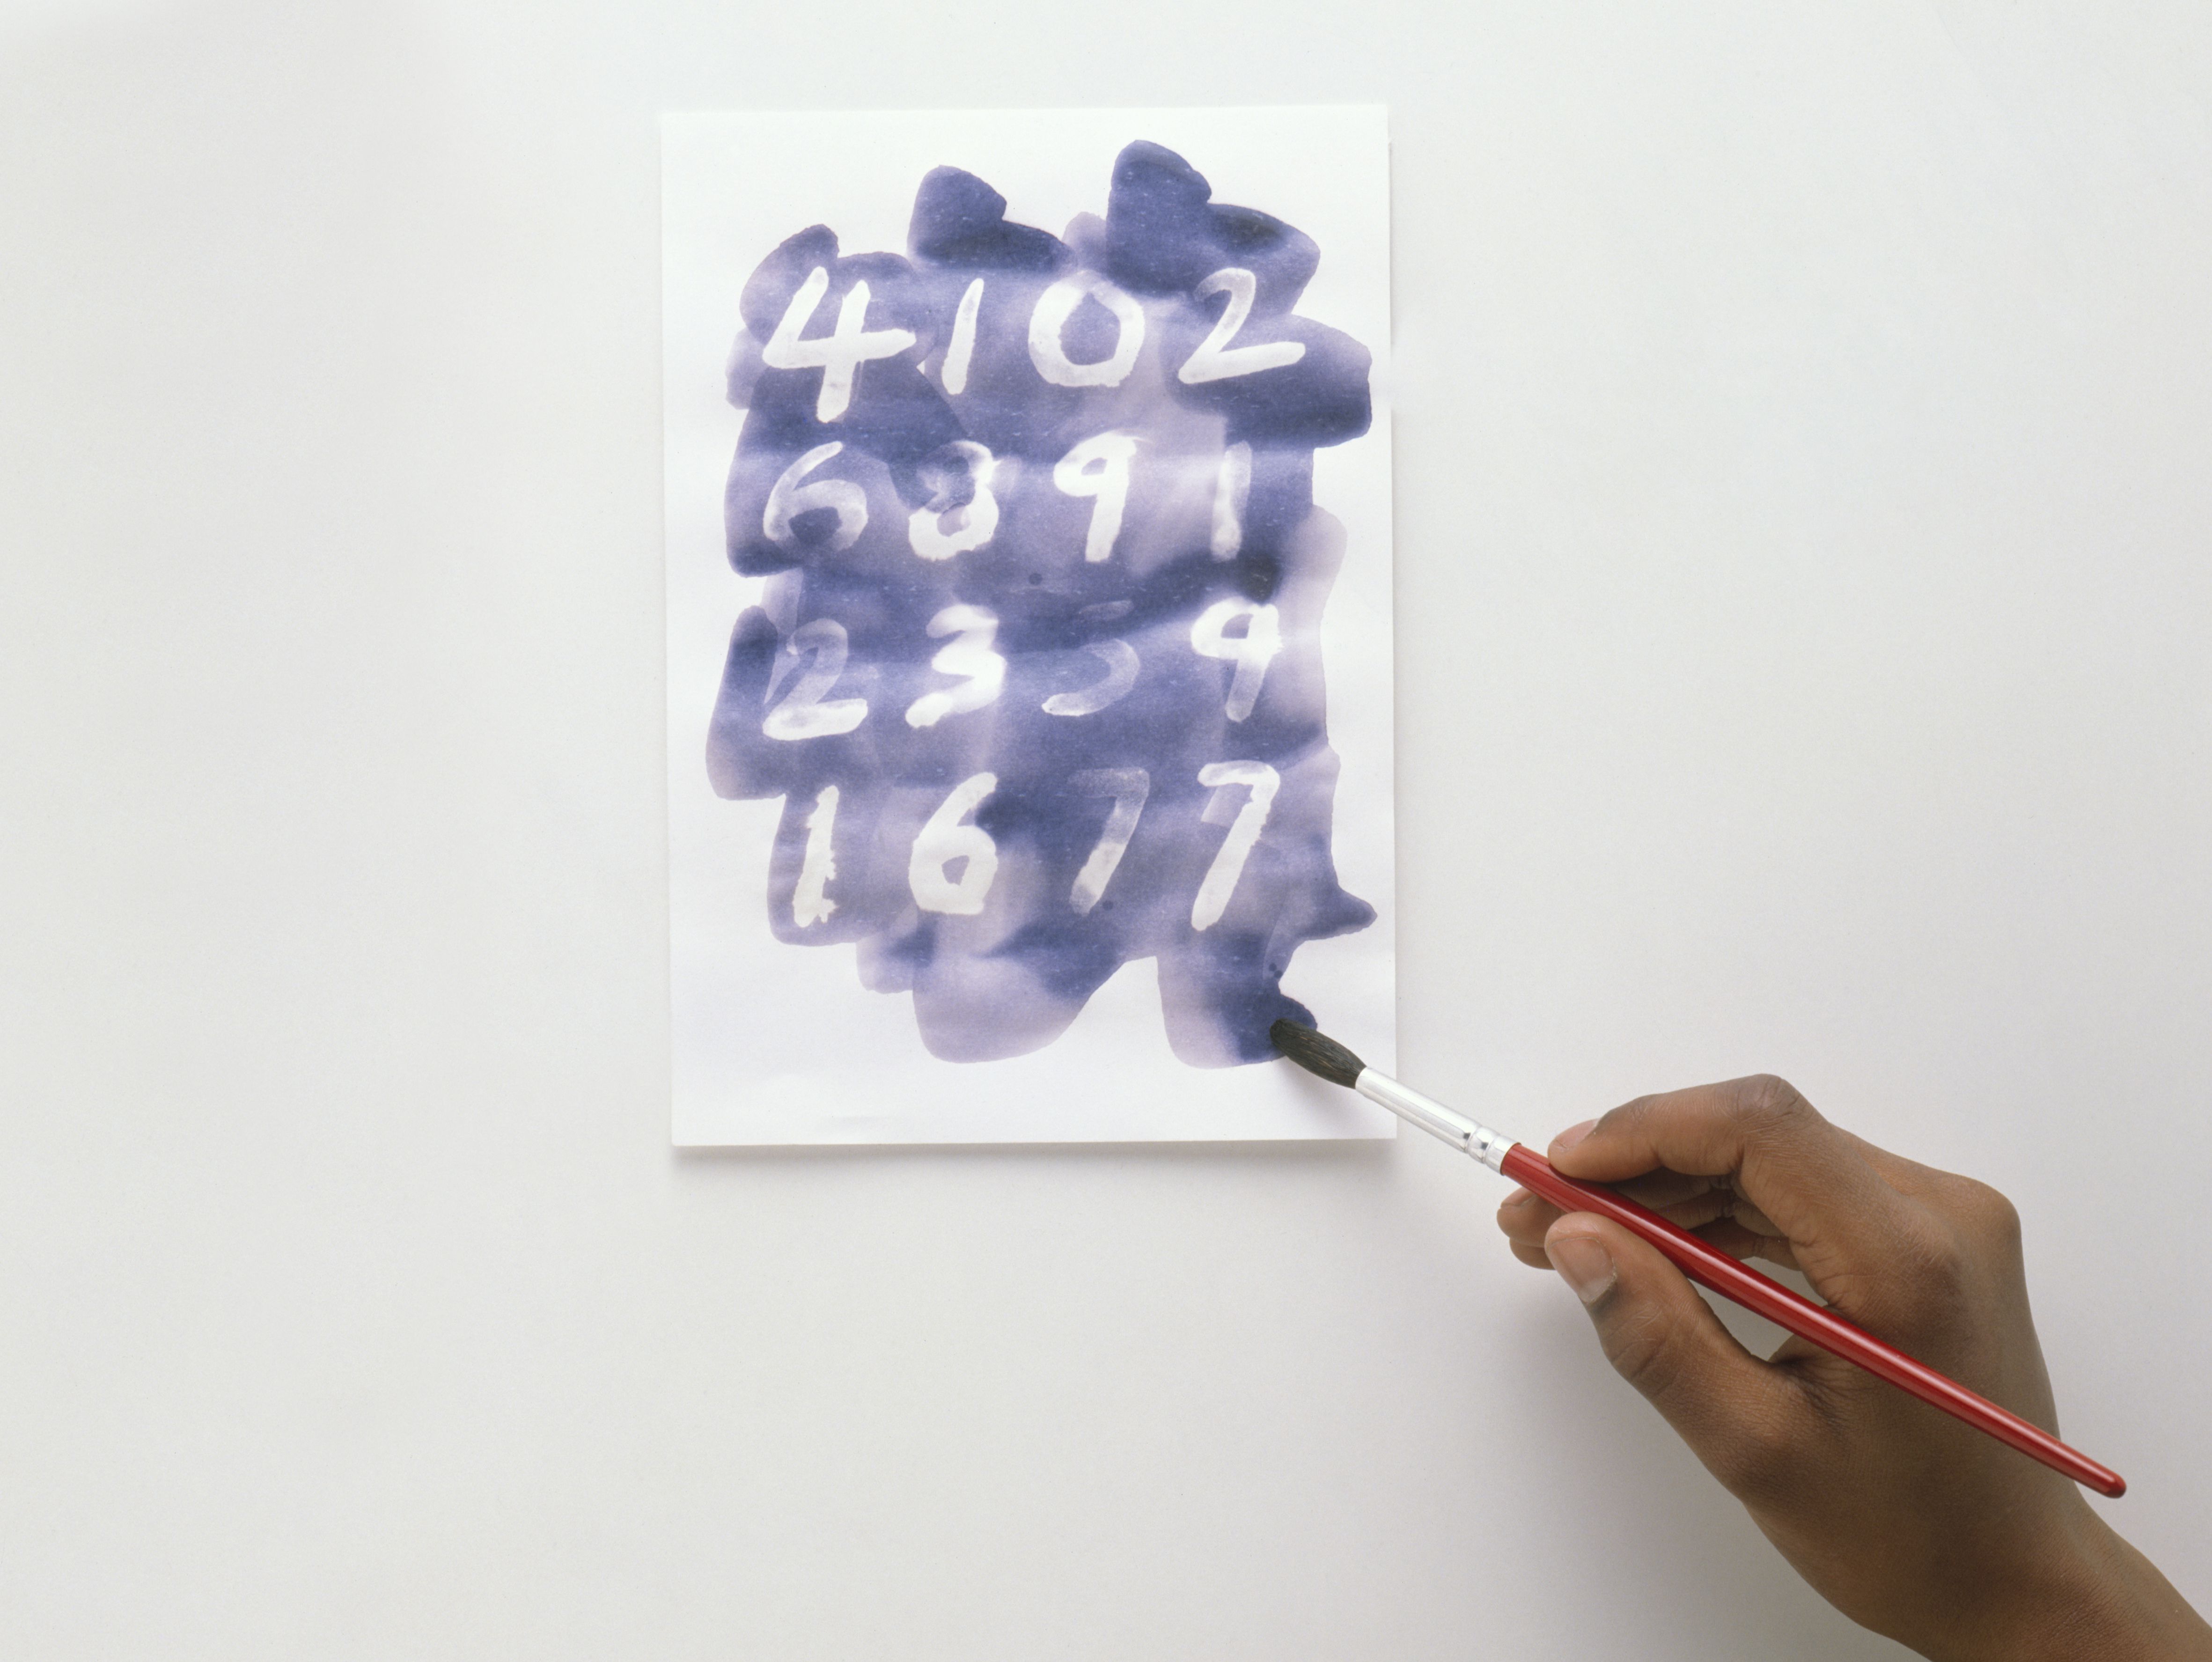 How to Make Your Own Invisible Ink